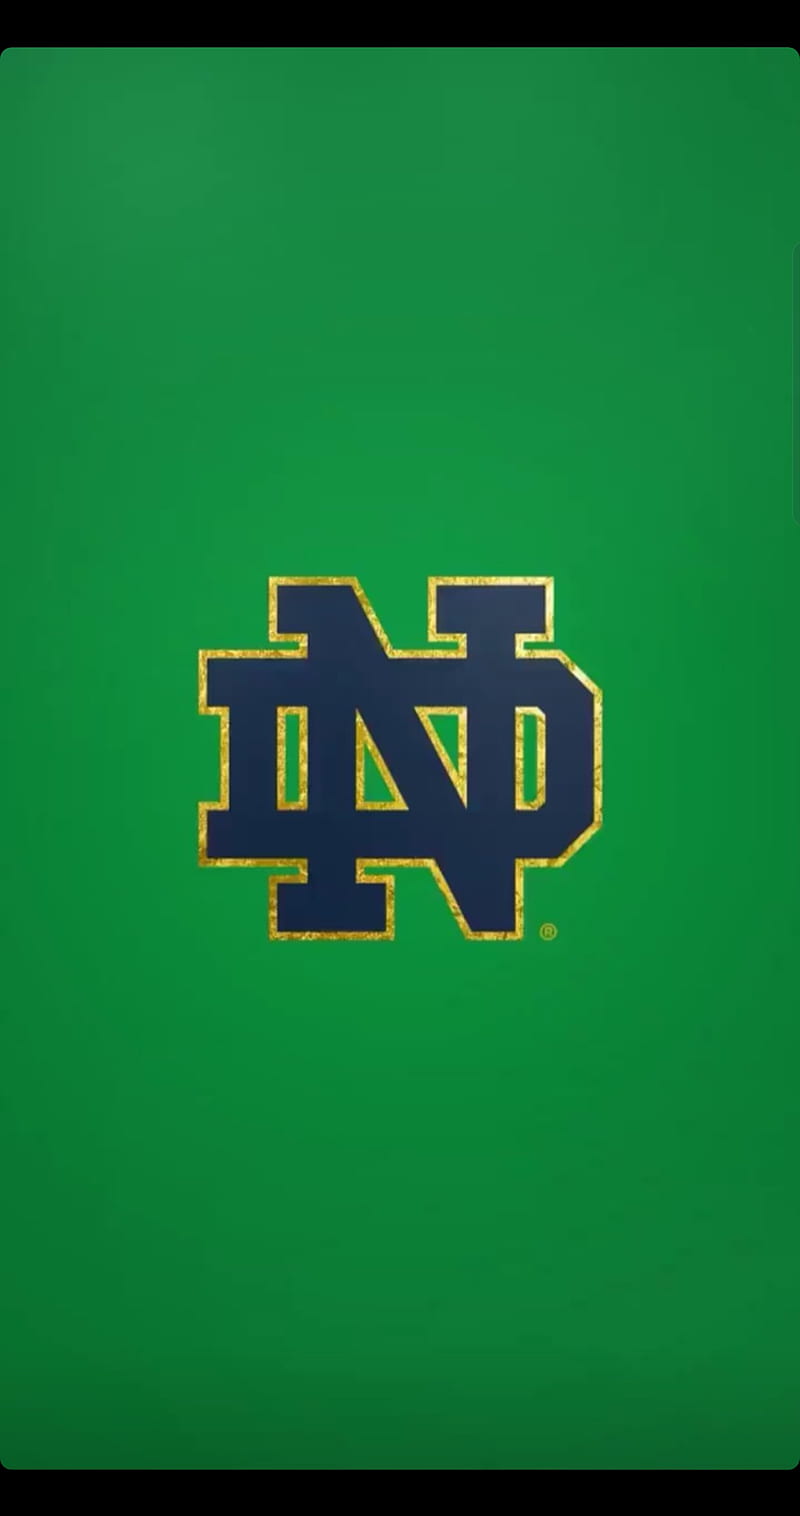 Need a NEW WALLPAPER for your Smartphone Here you GO IRISH GO  Fighting  irish logo Notre dame football Notre dame fighting irish football